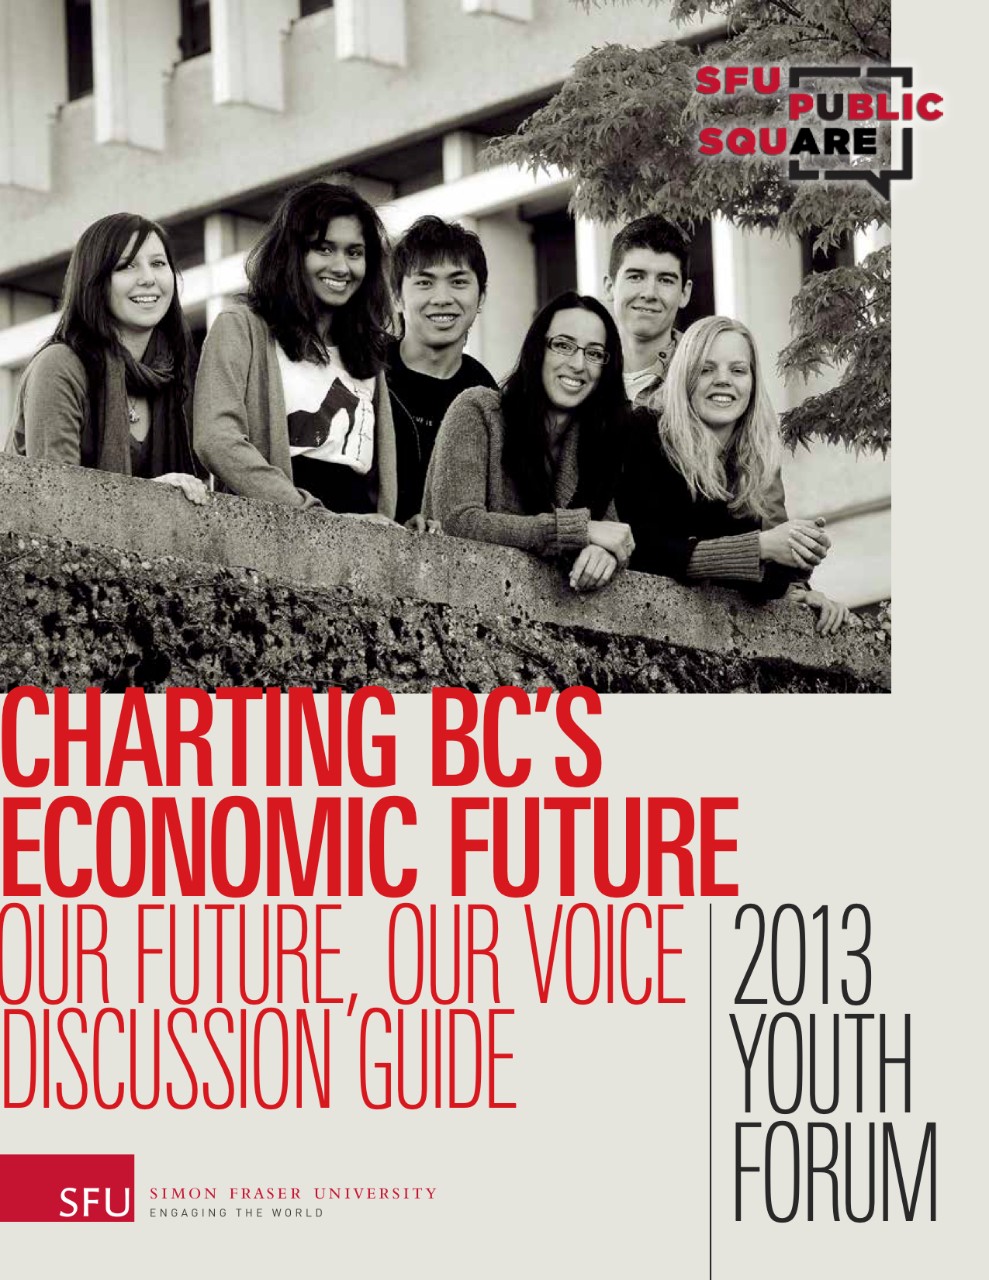 Our Future, Our Voice Youth Forum Discussion Guide